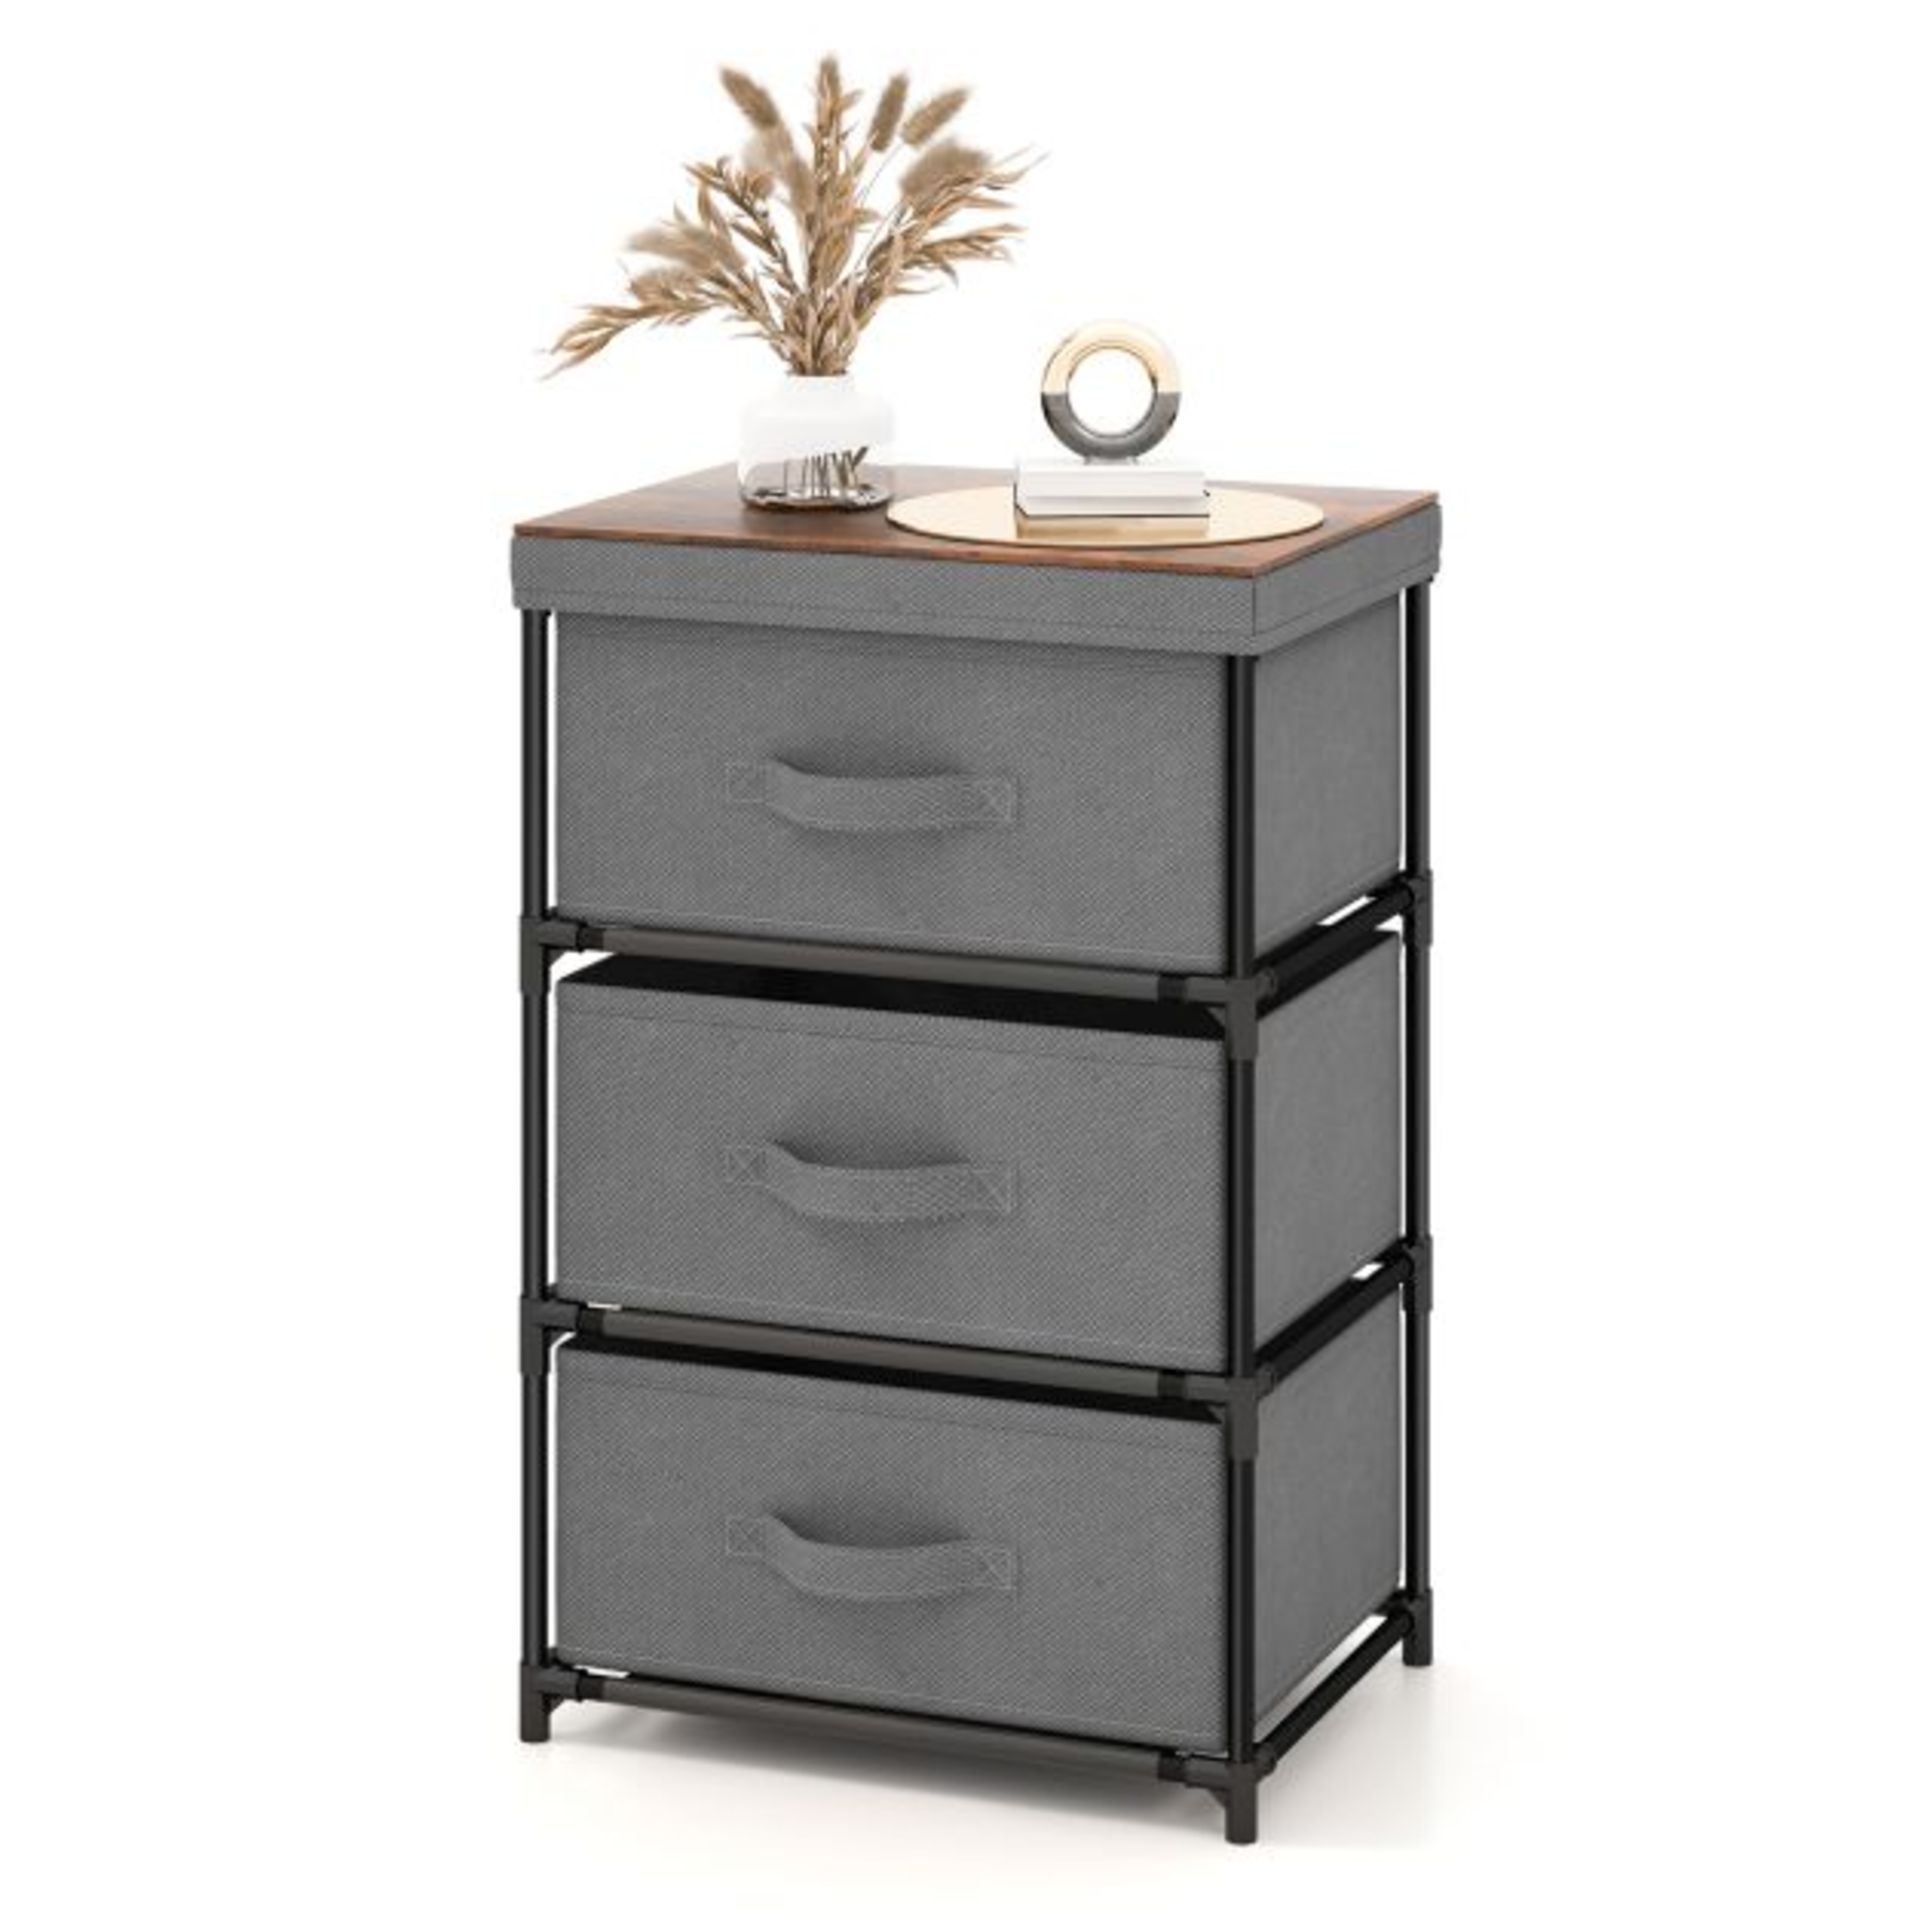 Fabric Storage Organizer Tower Unit with Removable Lid. - SR36. If you are looking for a storage